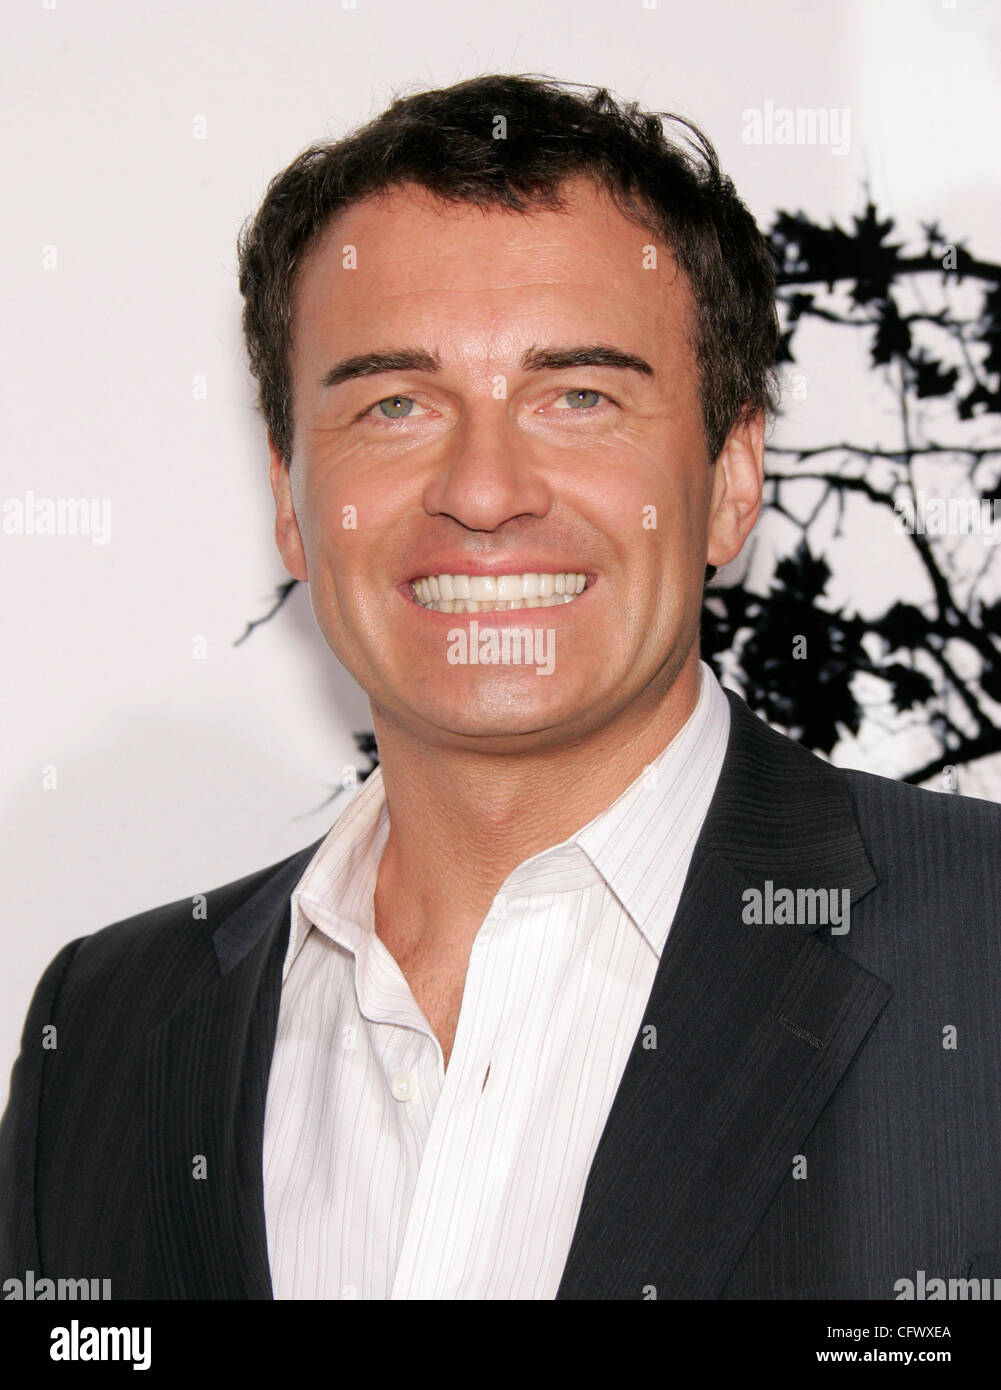 Mar 12, 2007; Hollywood, California, USA; Actor JULIAN McMAHON at the 'Premonition' World Premiere held at the ArcLight Theatre and the Cinerama Dome. Mandatory Credit: Photo by Lisa O'Connor/ZUMA Press. (©) Copyright 2007 by Lisa O'Connor Stock Photo